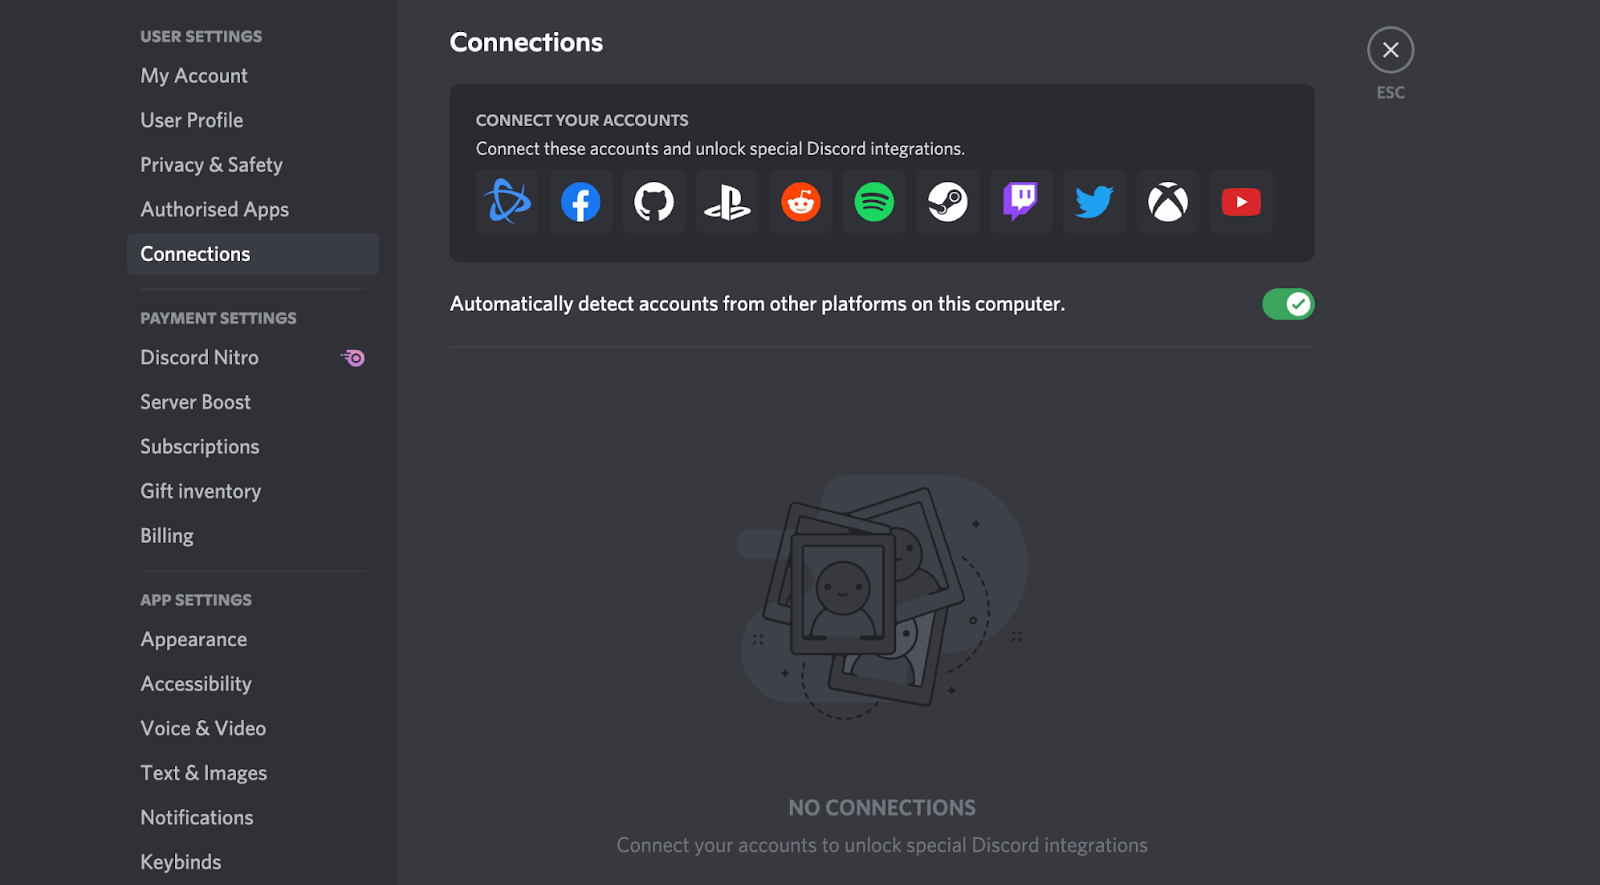 The connections menu on Discord for connecting Twitch, YouTube or Facebook for streaming.